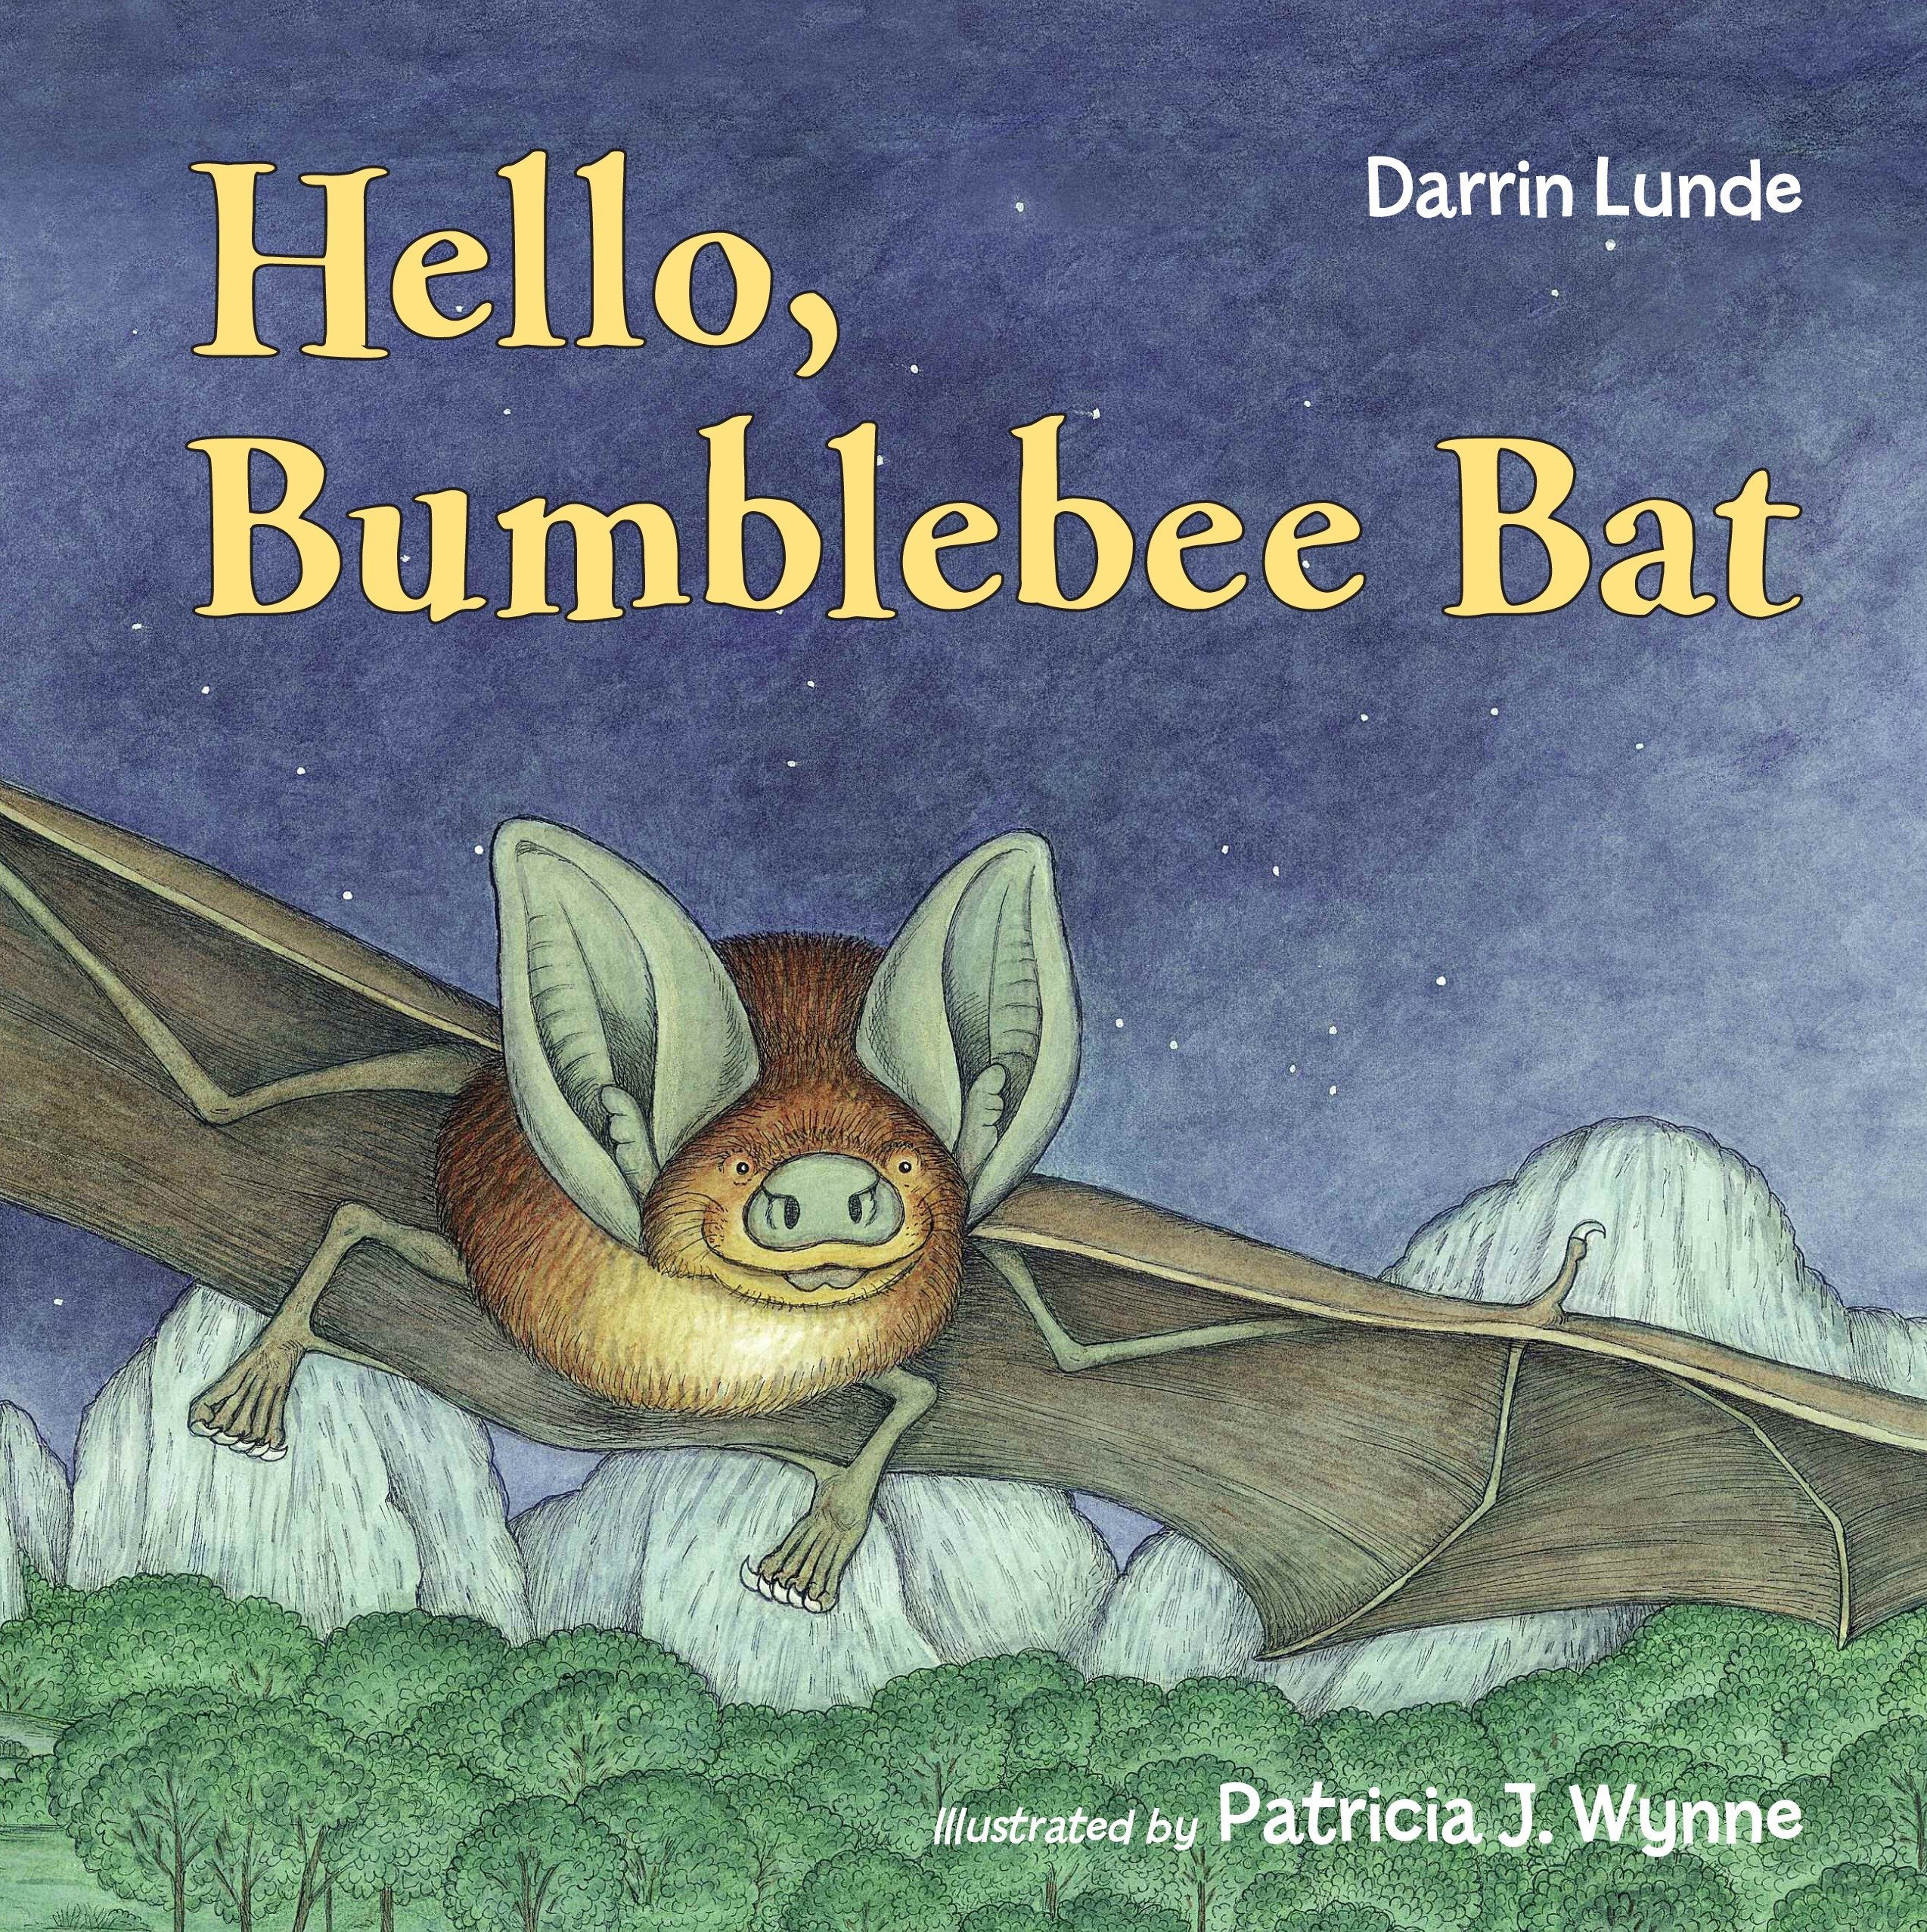 speech and language teaching concepts for Hello Bumblebee Bat in speech therapy​ ​